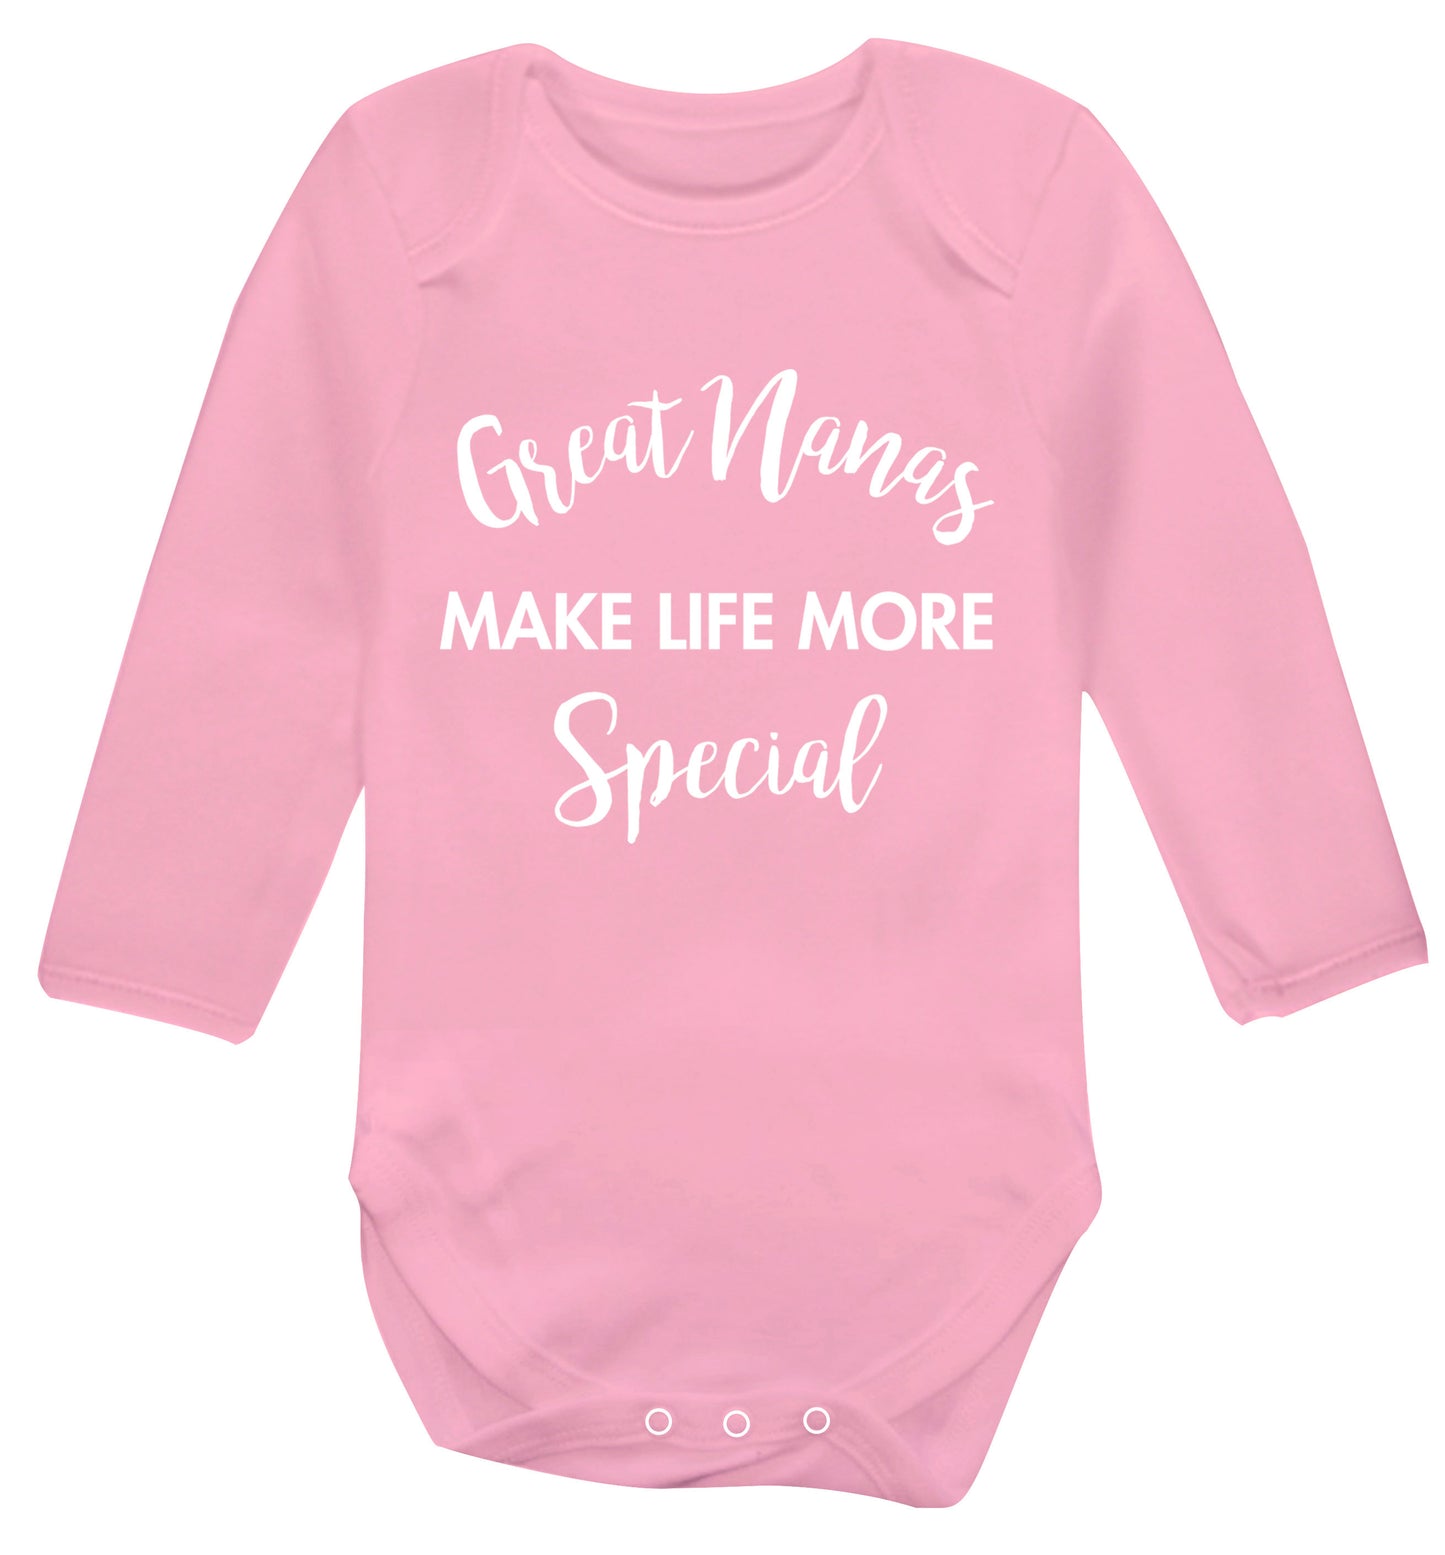 Great nanas make life more special Baby Vest long sleeved pale pink 6-12 months